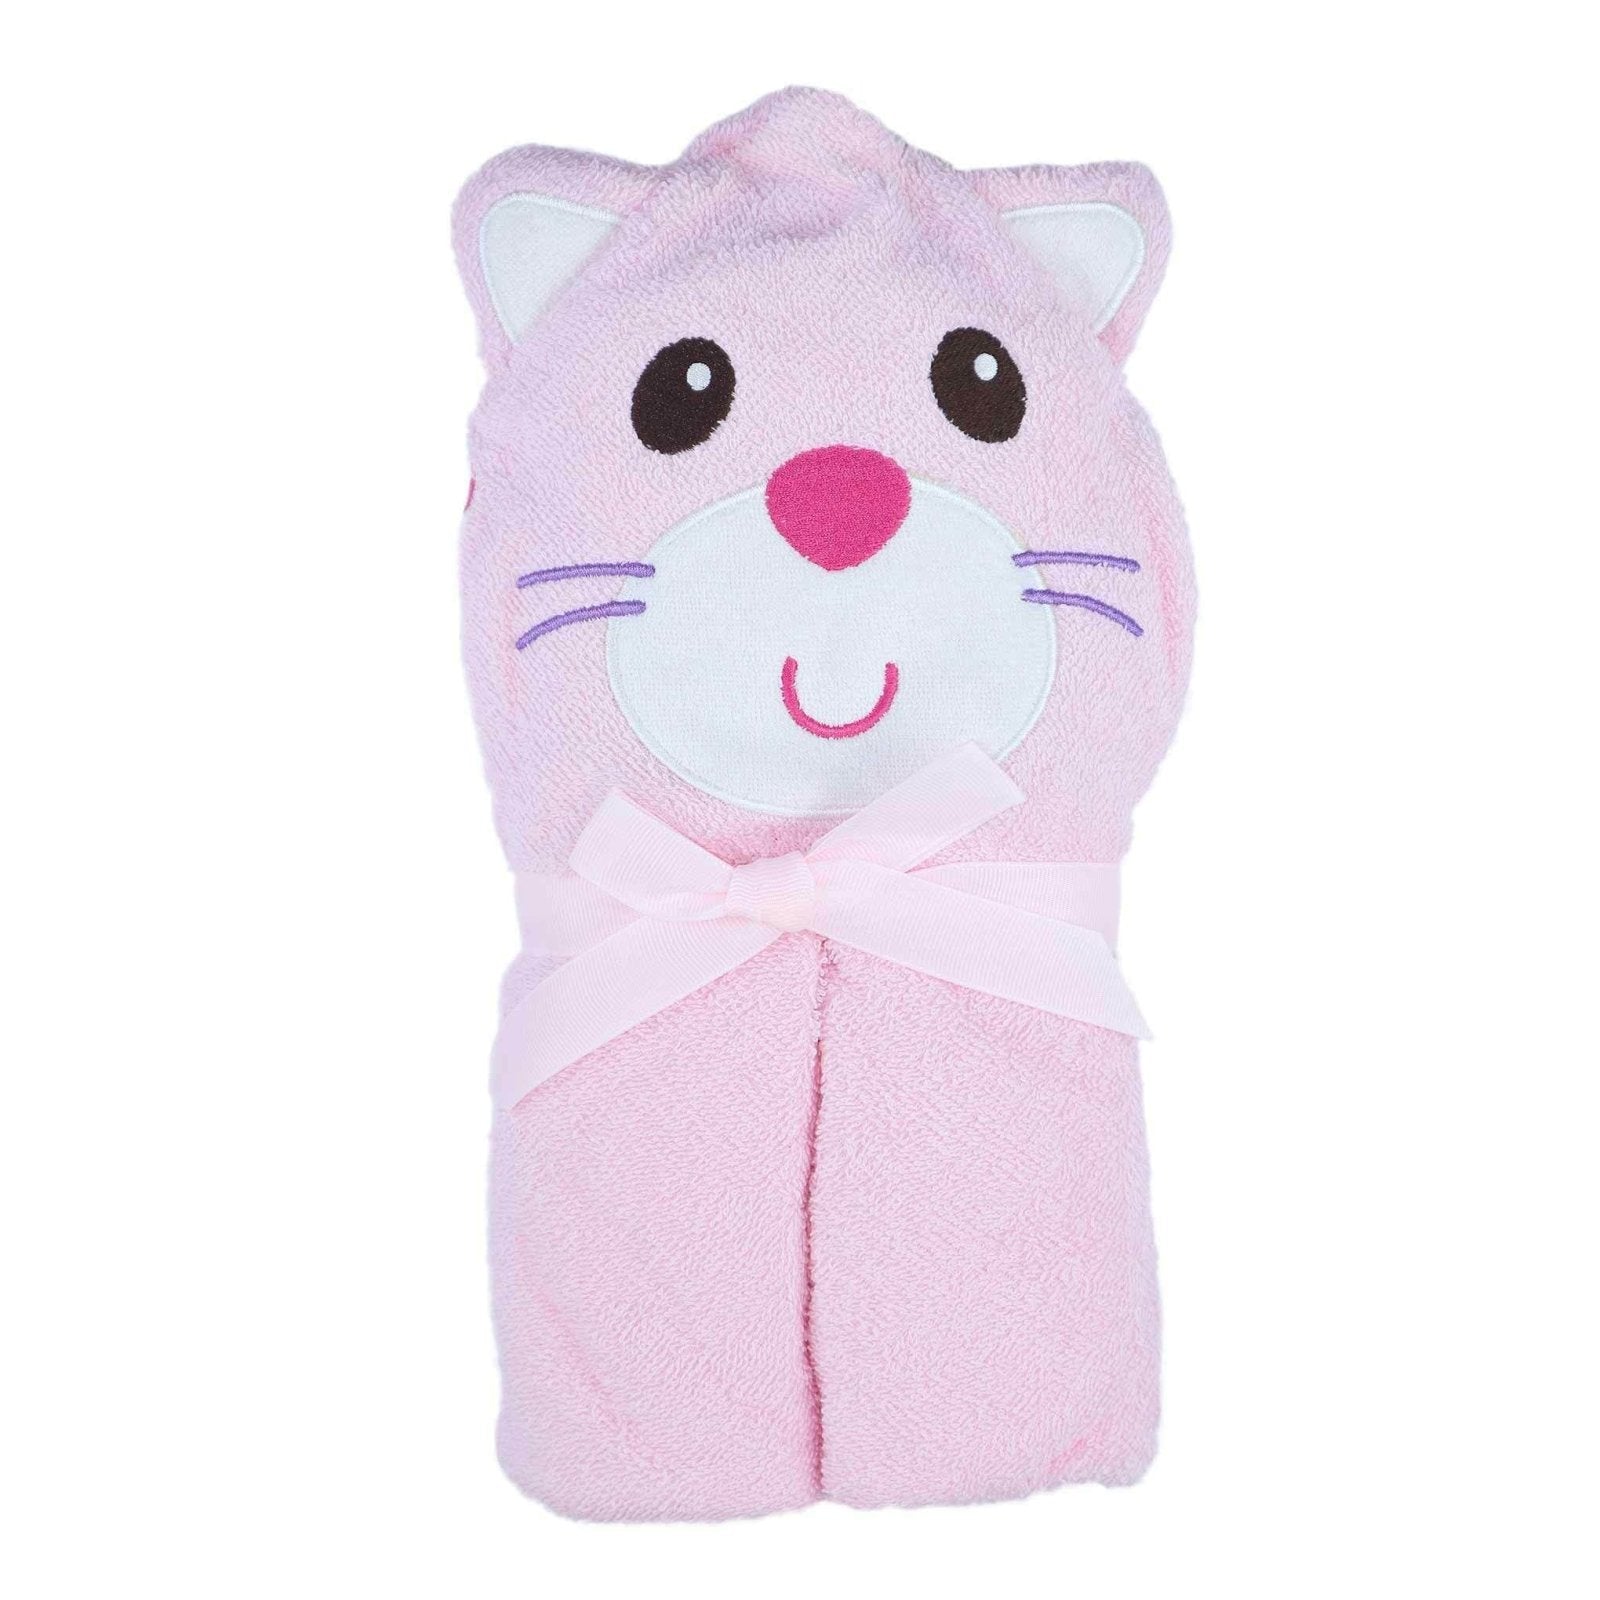 Hooded Towel Pink Cat by Little Darling